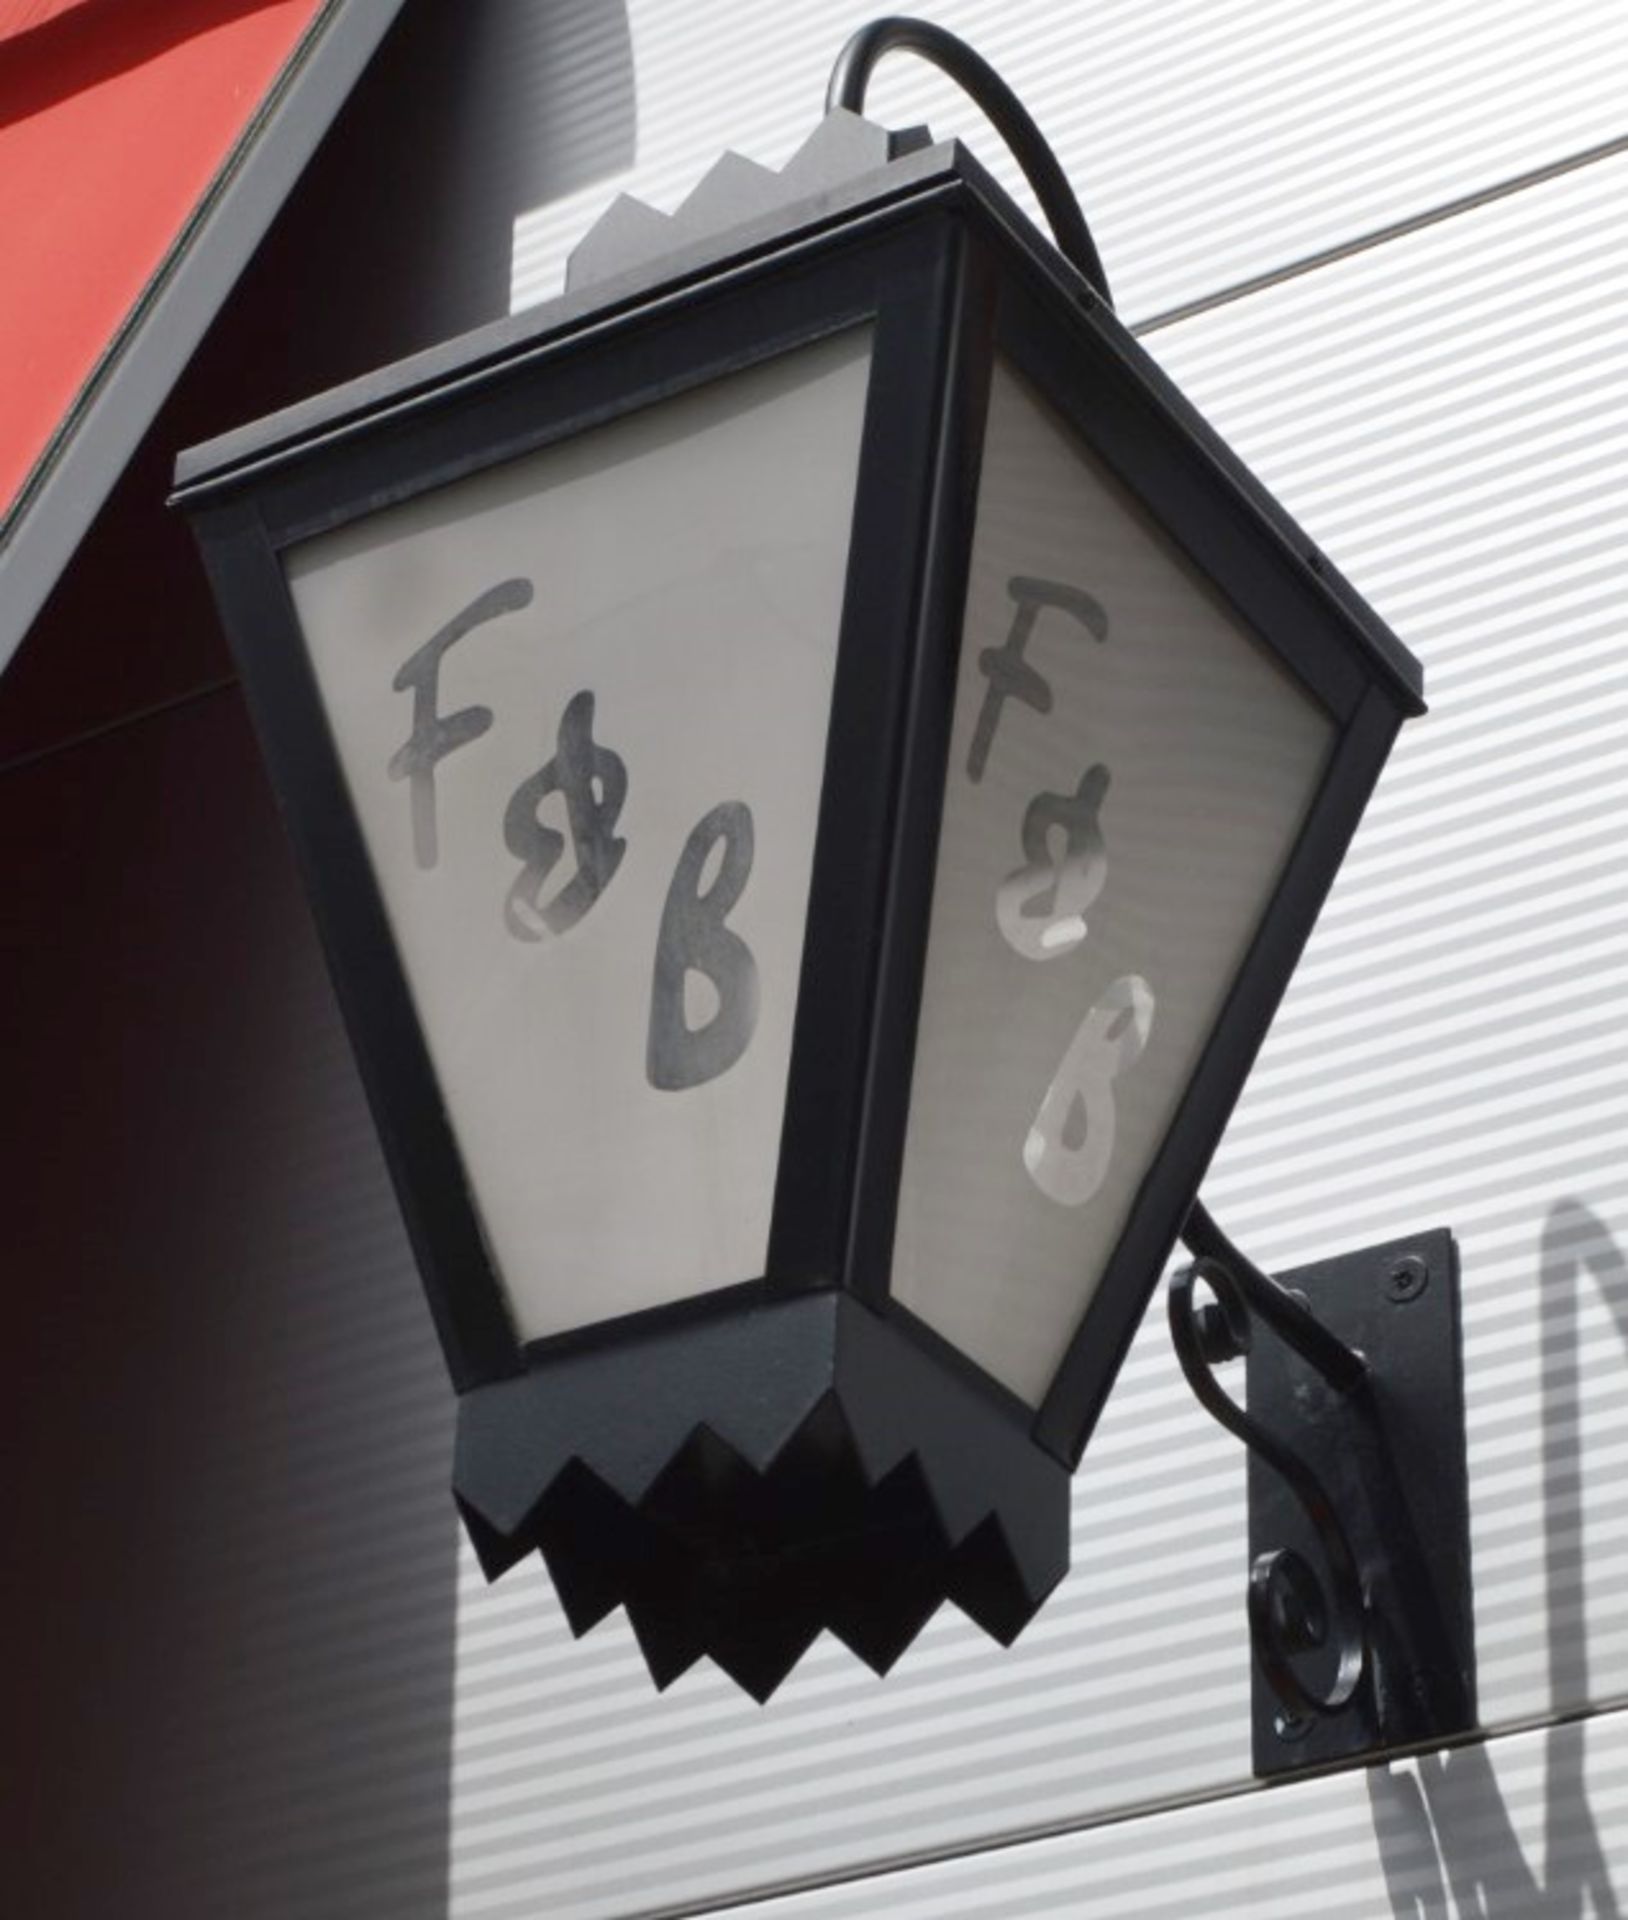 2 x Large Outdoor Wall Mounted Lanterns - CL357 - Location: Bolton BL6 - Image 2 of 3